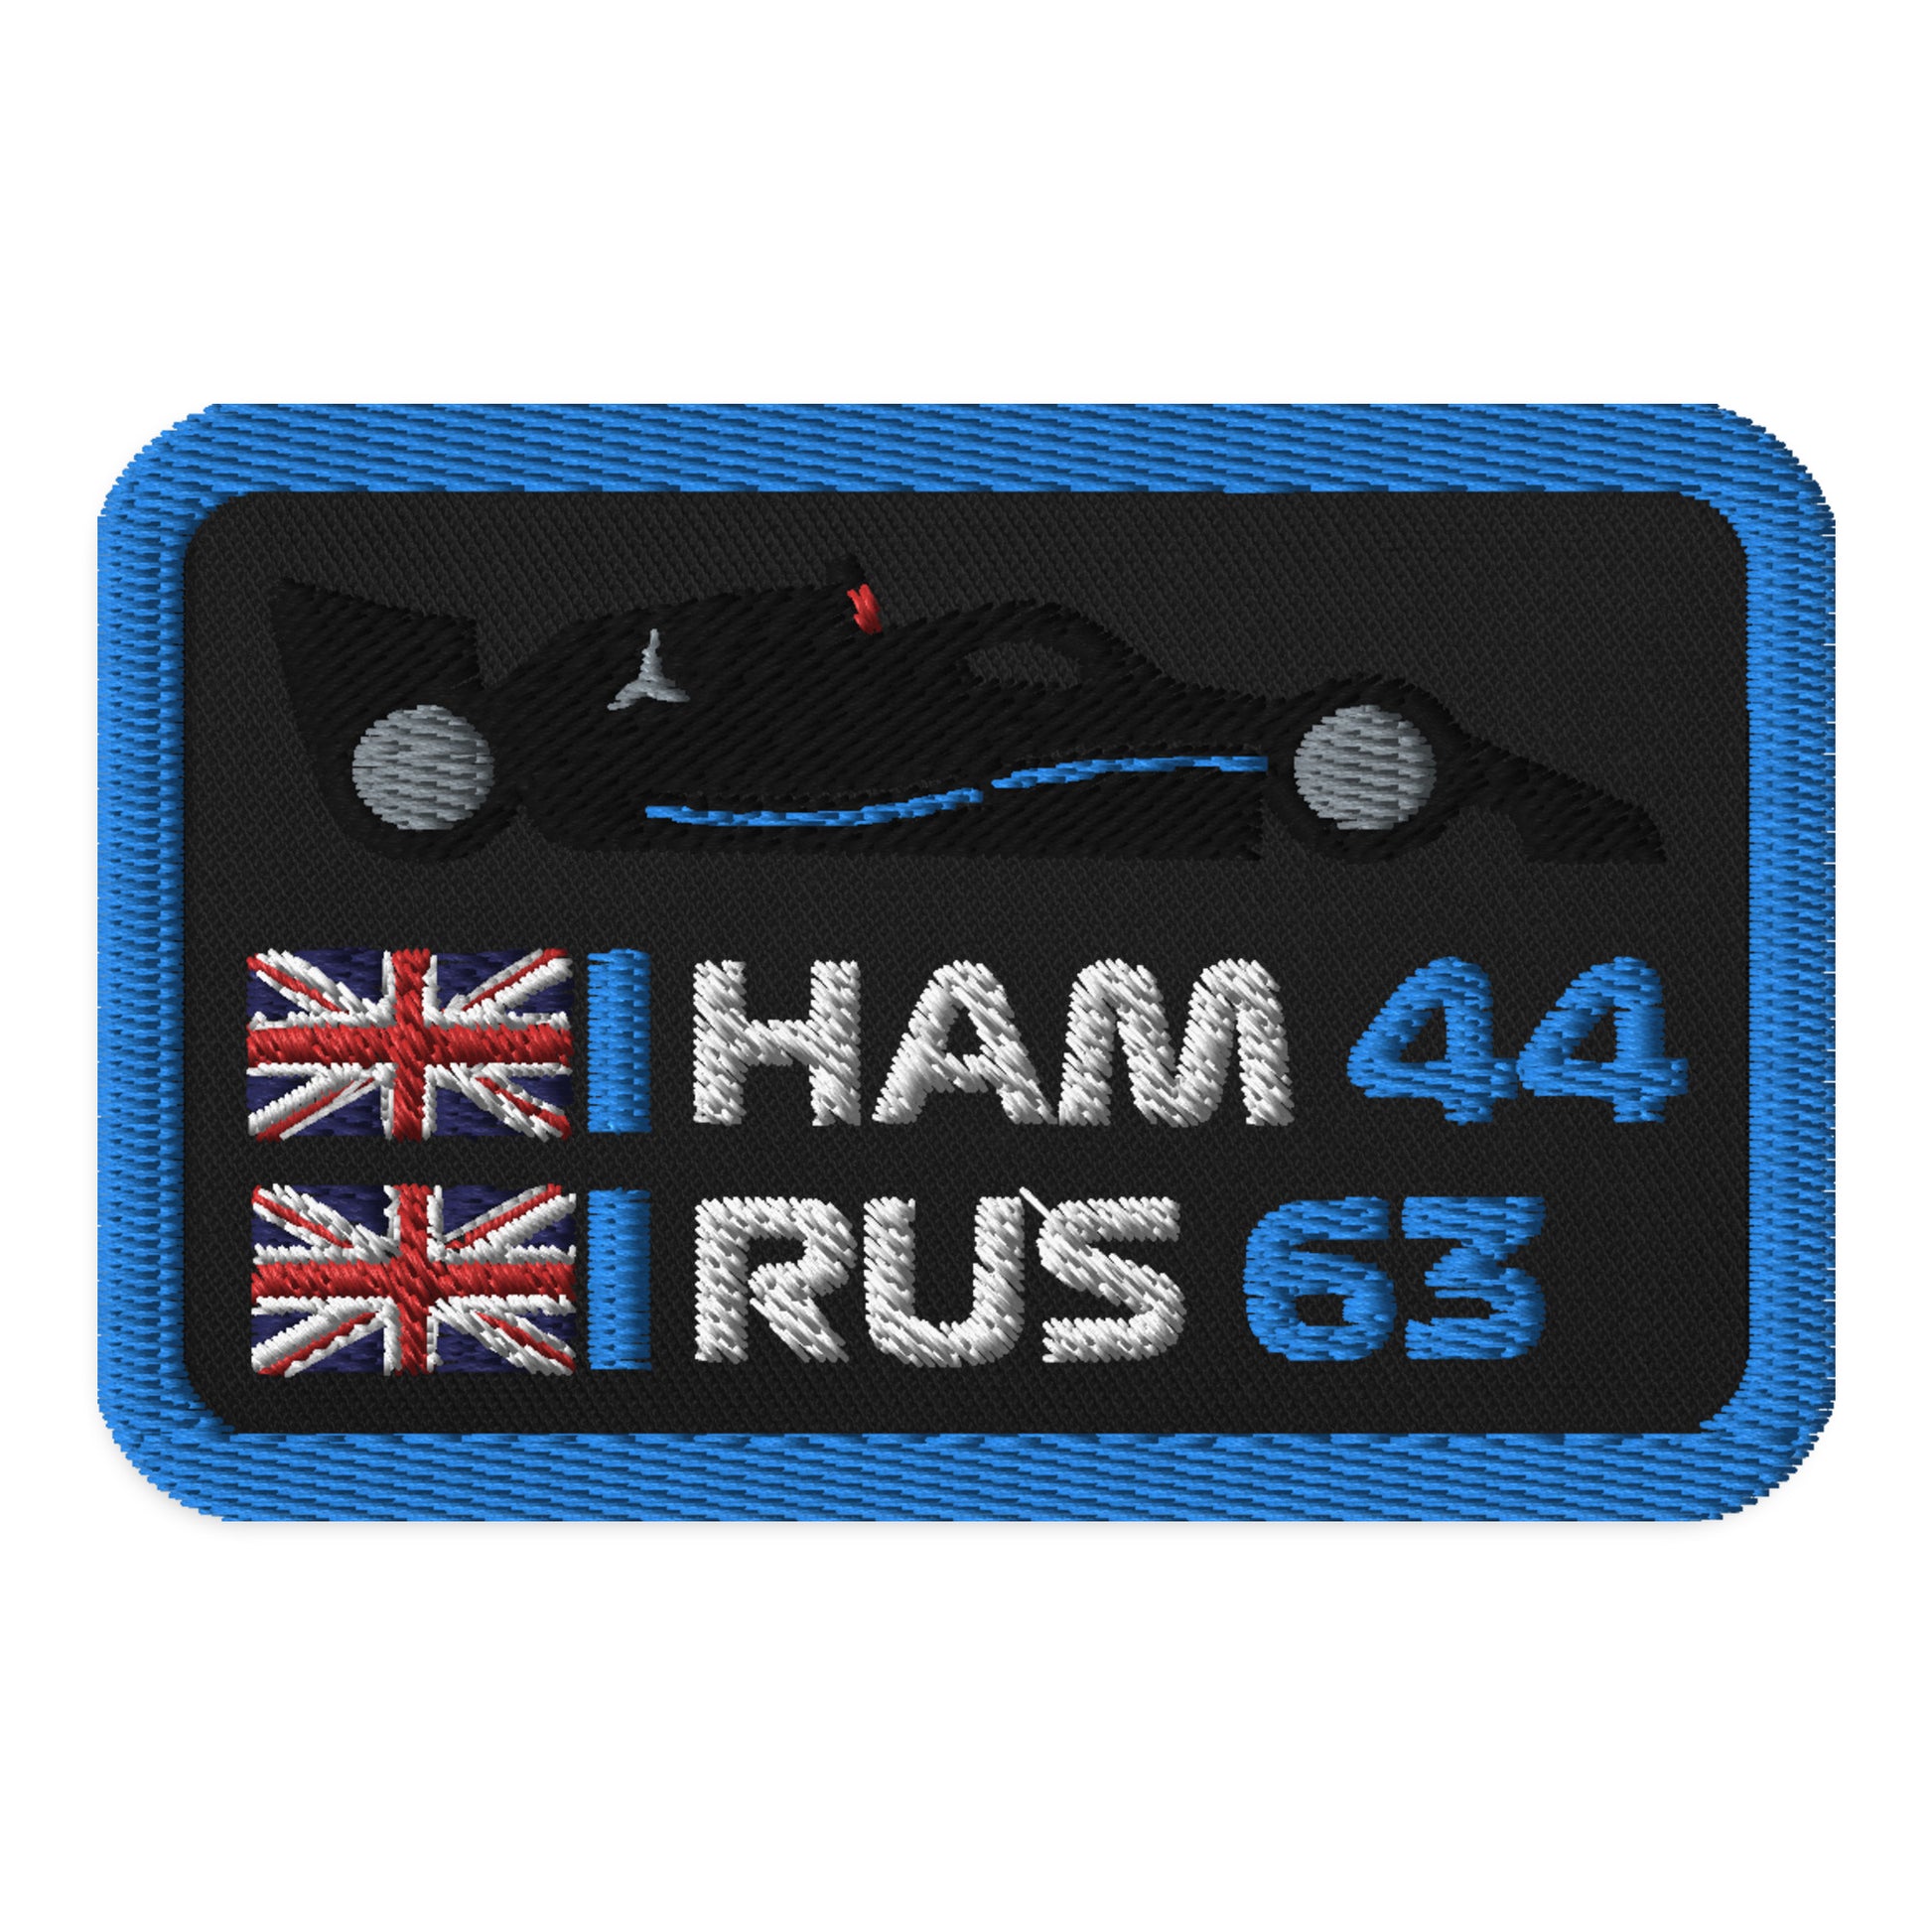 Embroidered Mercedes F1 Patch black blue